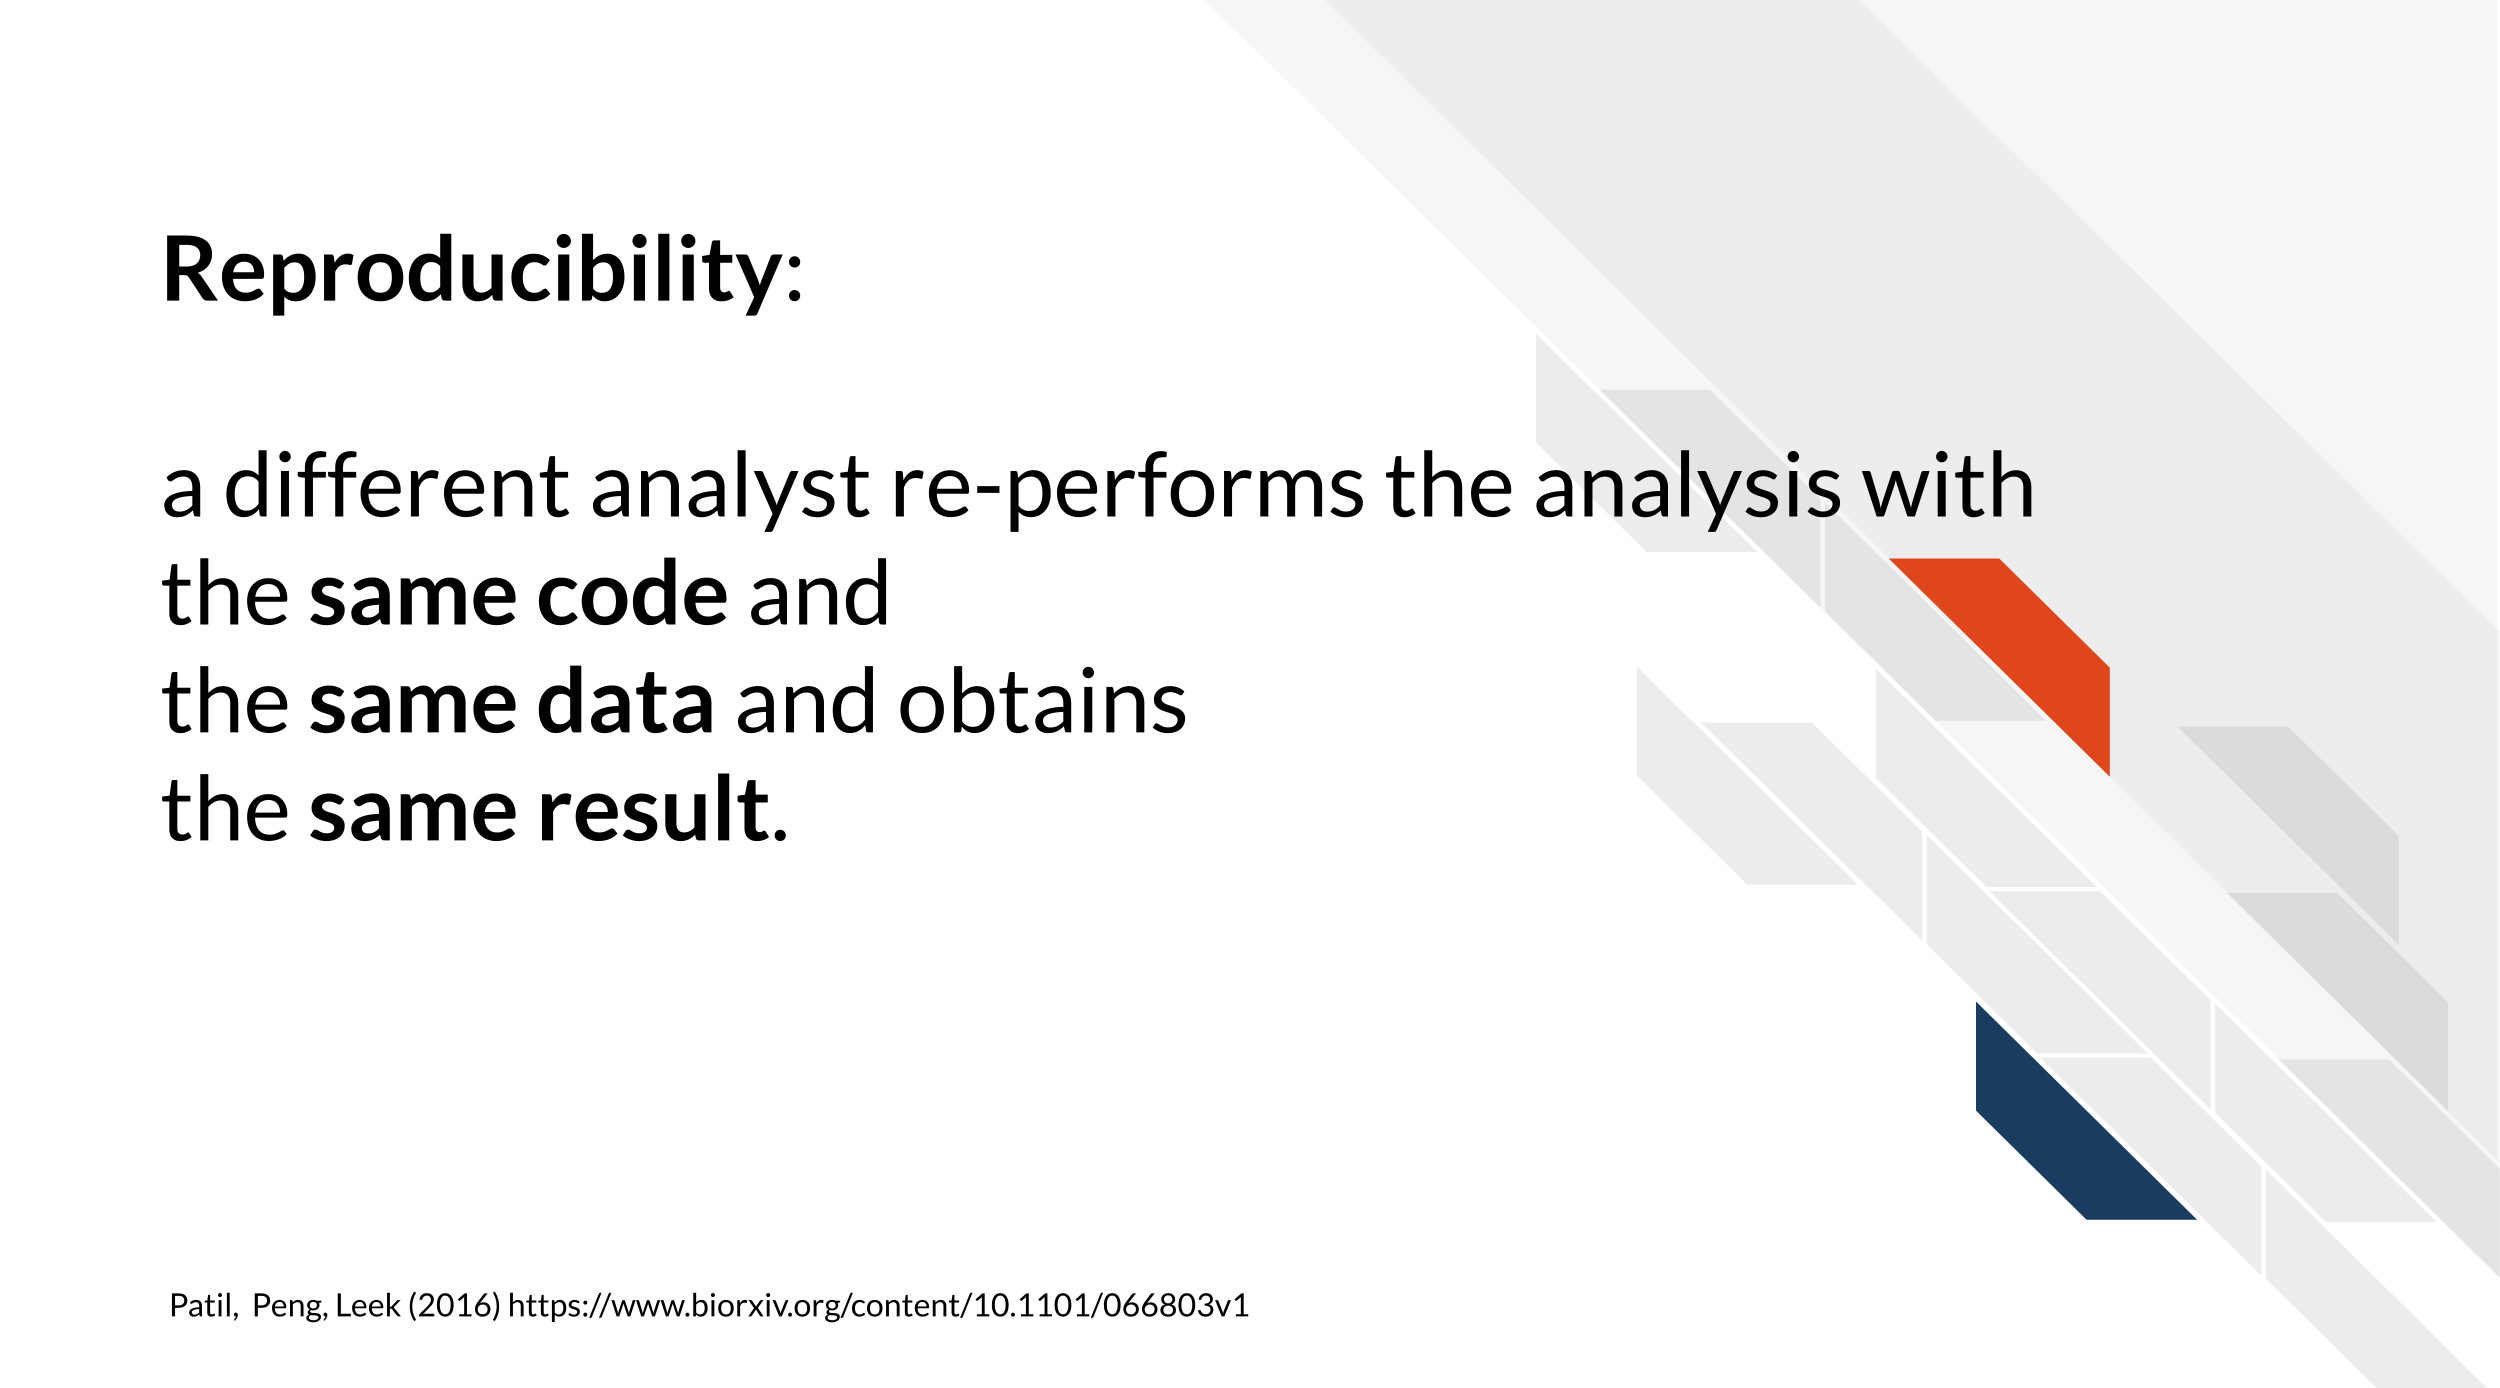 Reproducibility is a different analyst re­-performing the same analysis with the same code and data.